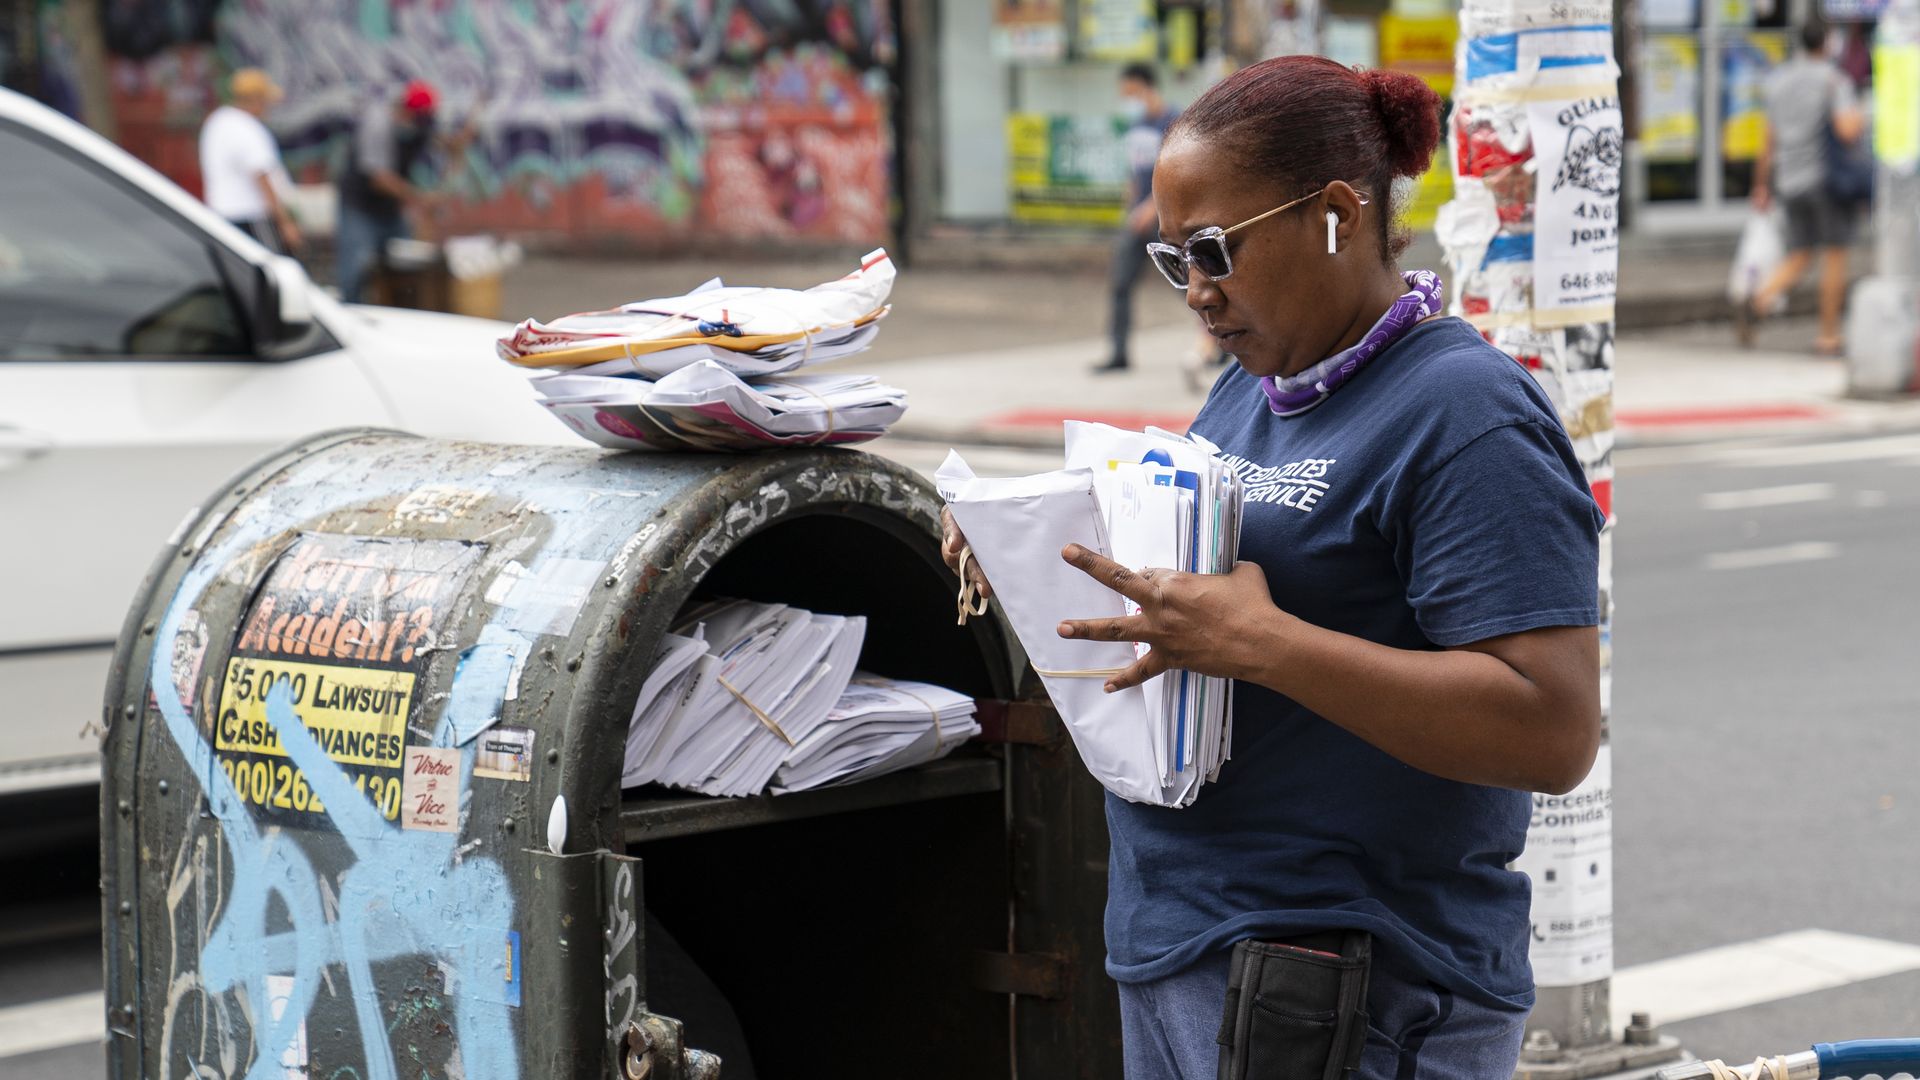  A U.S. Postal Service employee sorts mail at a distribution box September 26, 2020 in New York City.